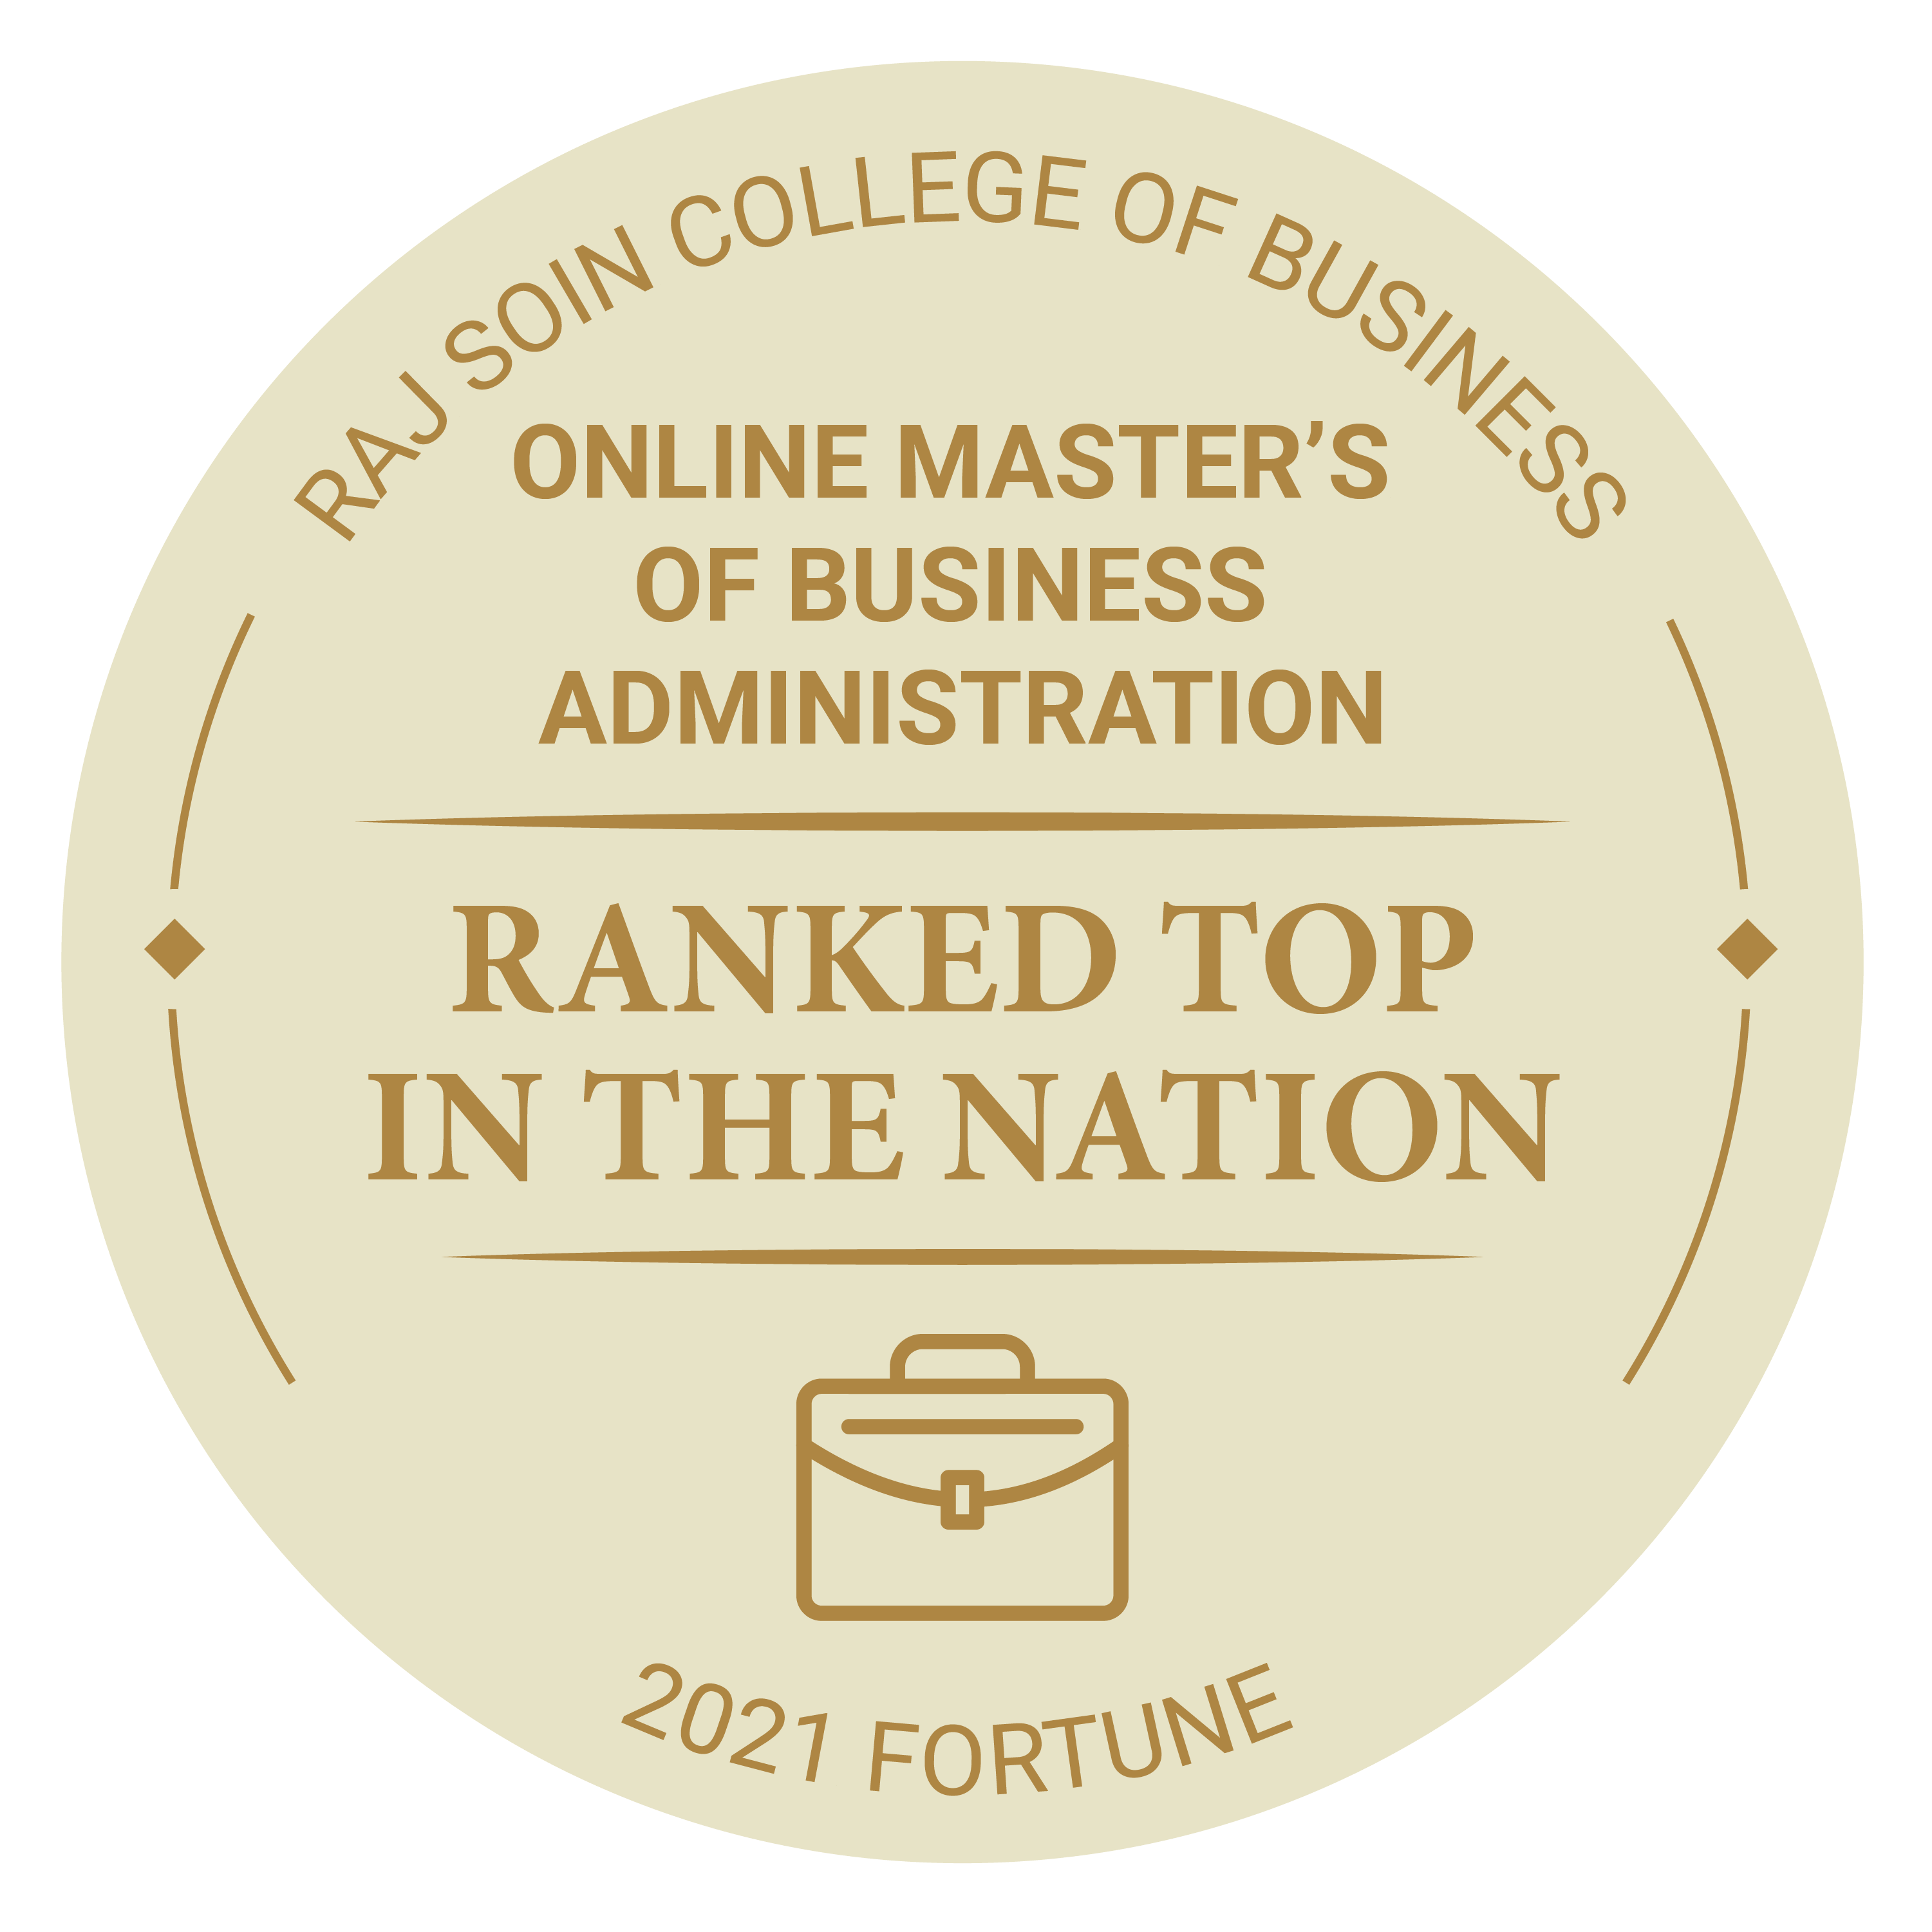 2021 Fortune Raj Soin College of Business Online Master's of Business Administration Ranked top in the nation